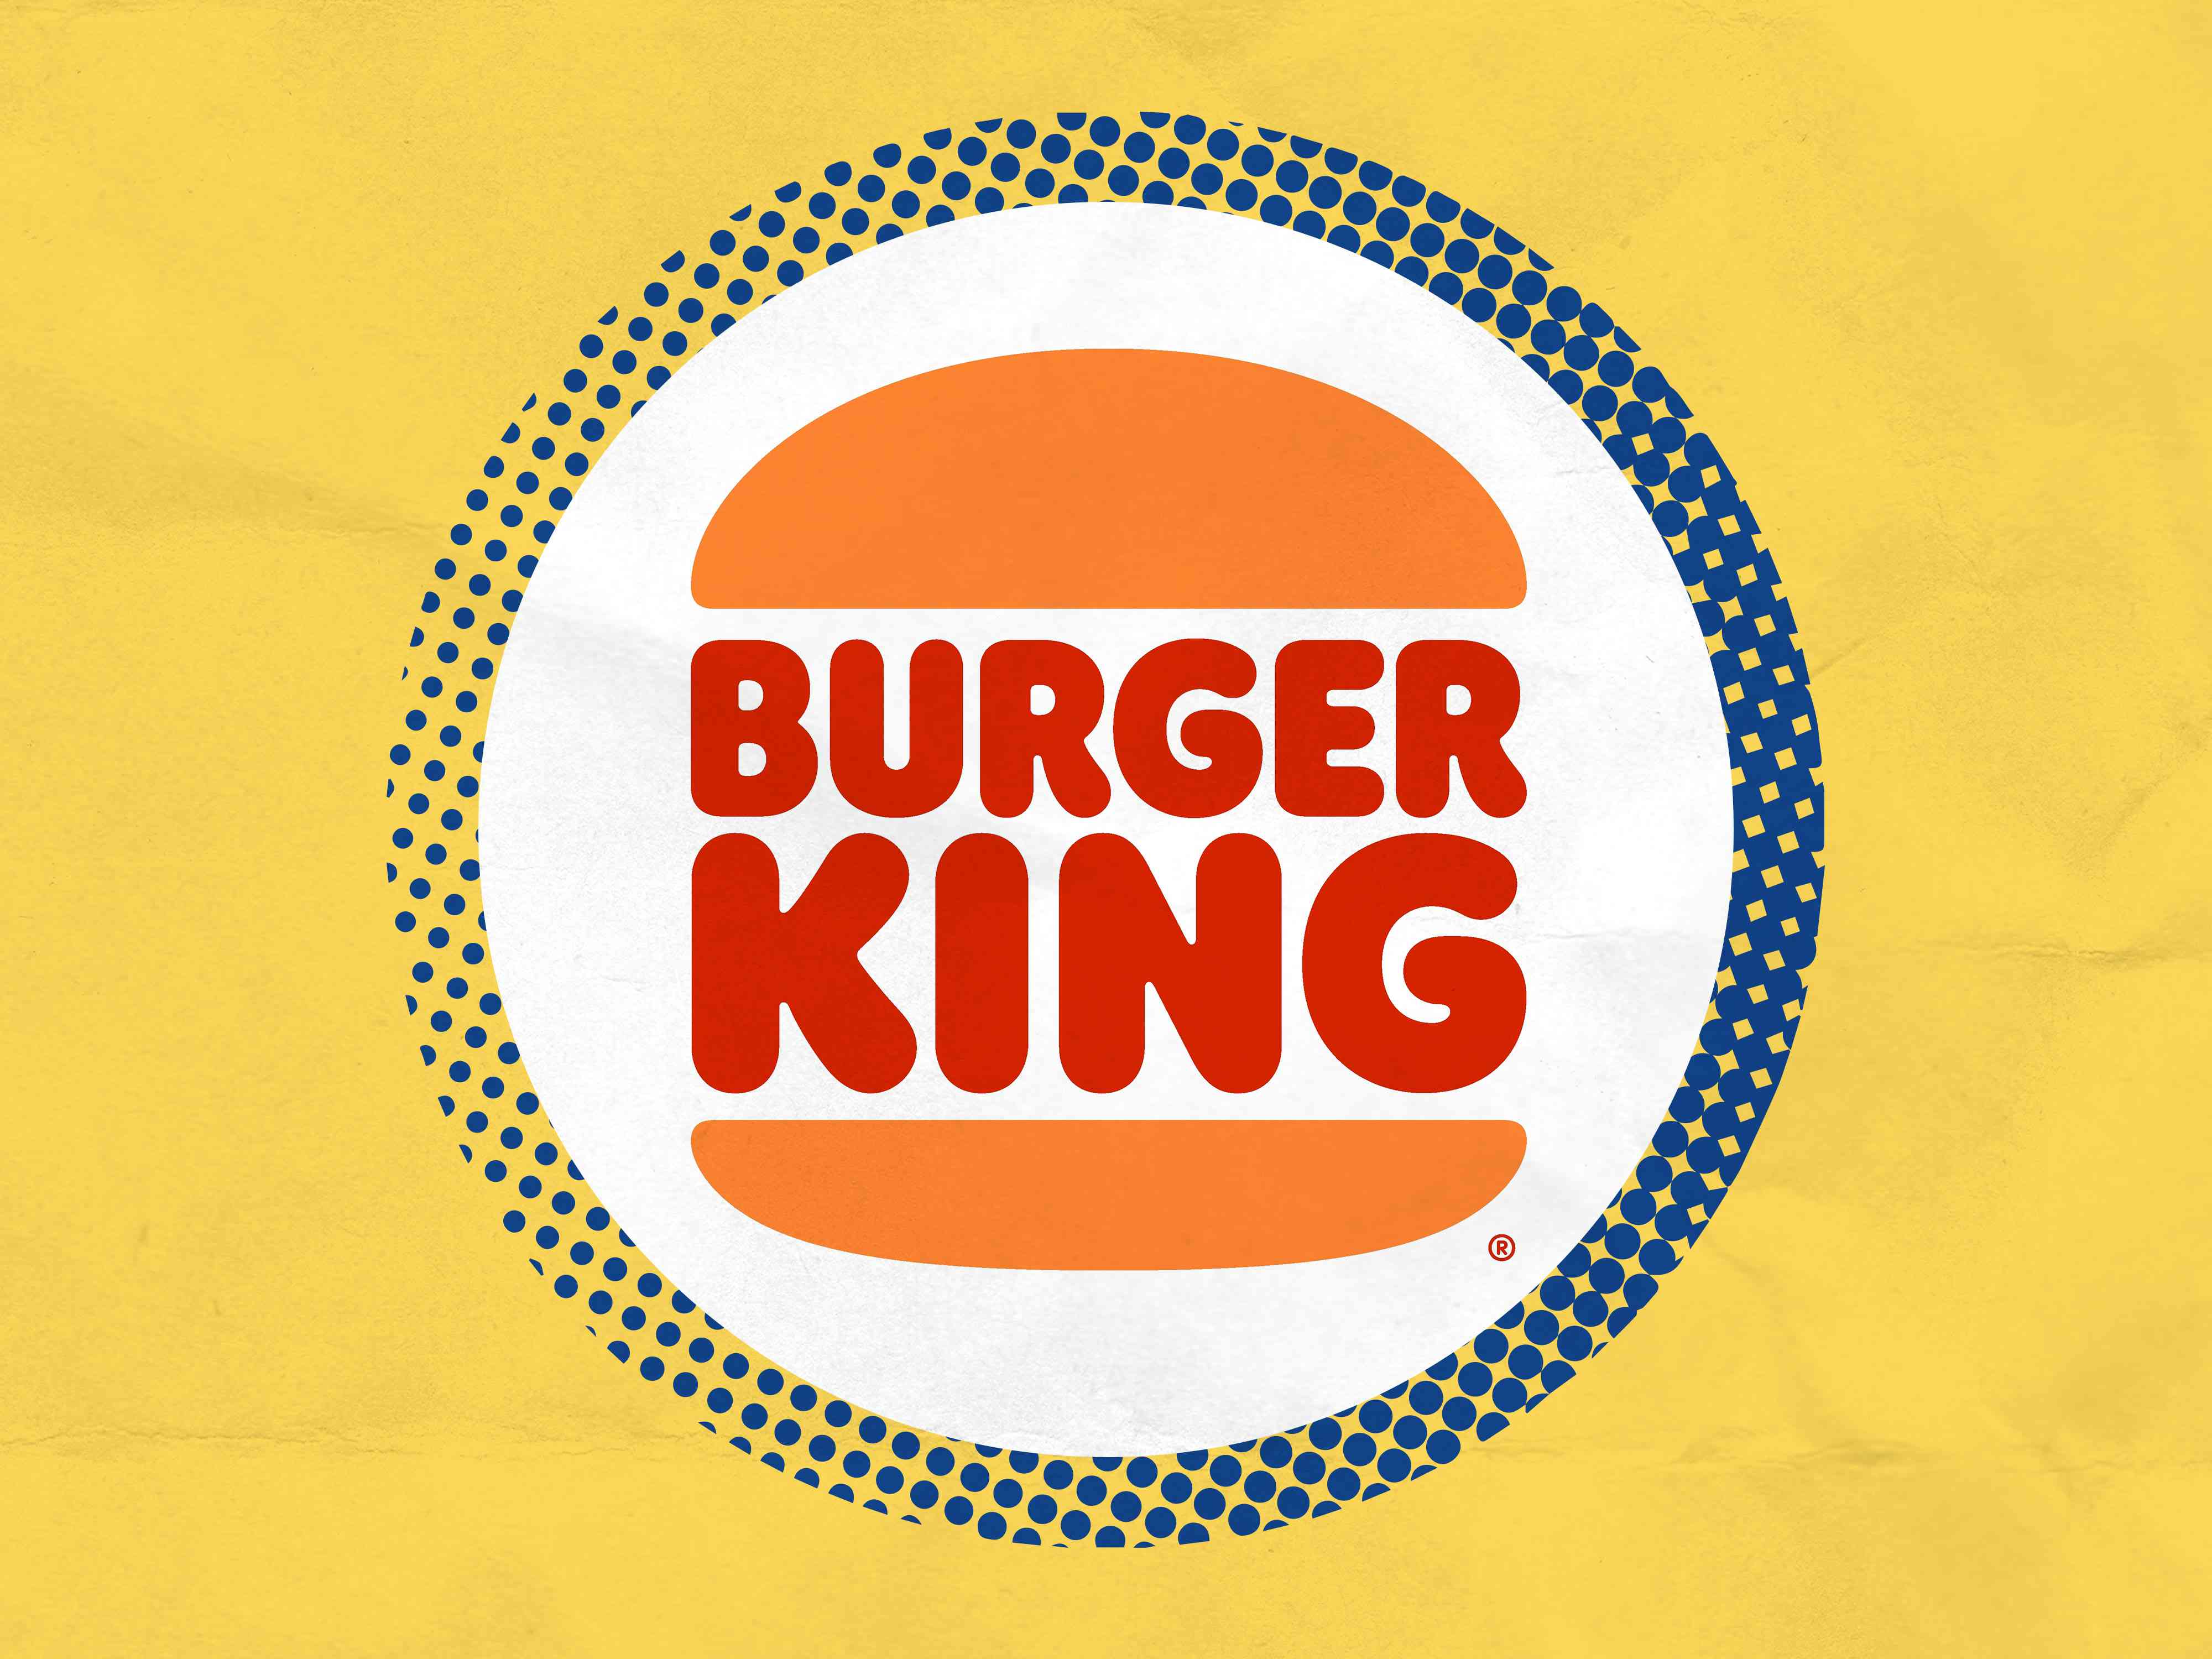 Burger King Is Launching a Brand-New Menu Item and Bringing Back 2 Fan-Faves